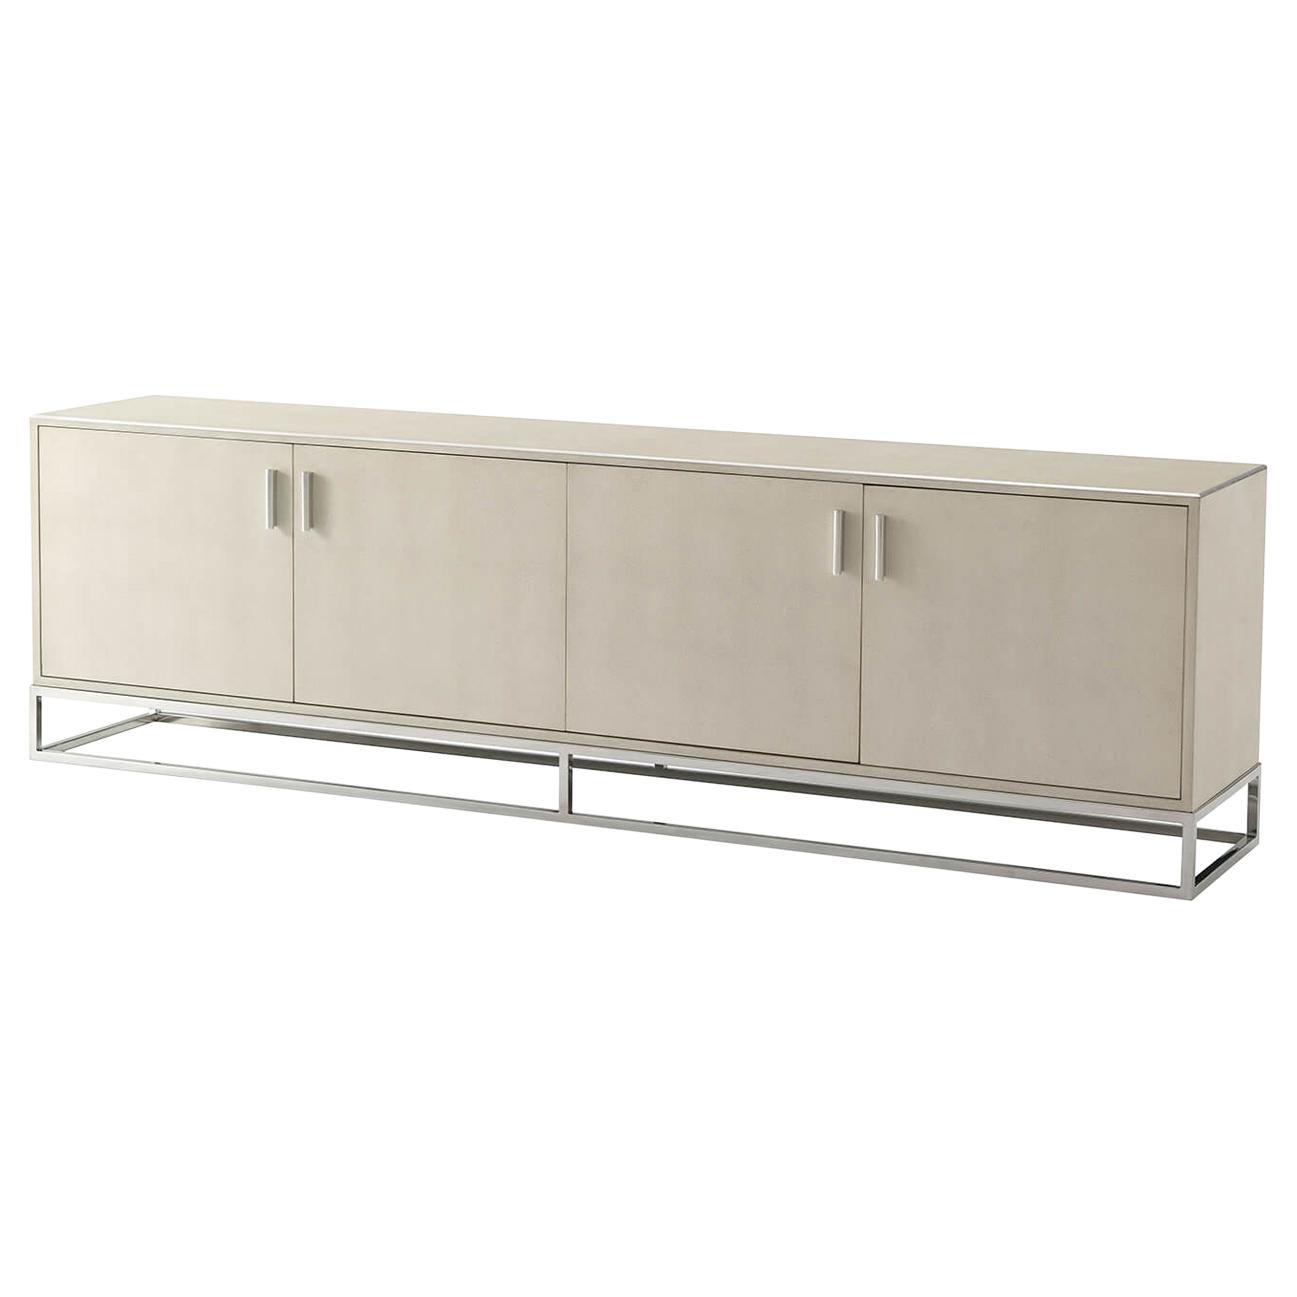 Modern Leather Wrapped Media Cabinet, Light Overcast